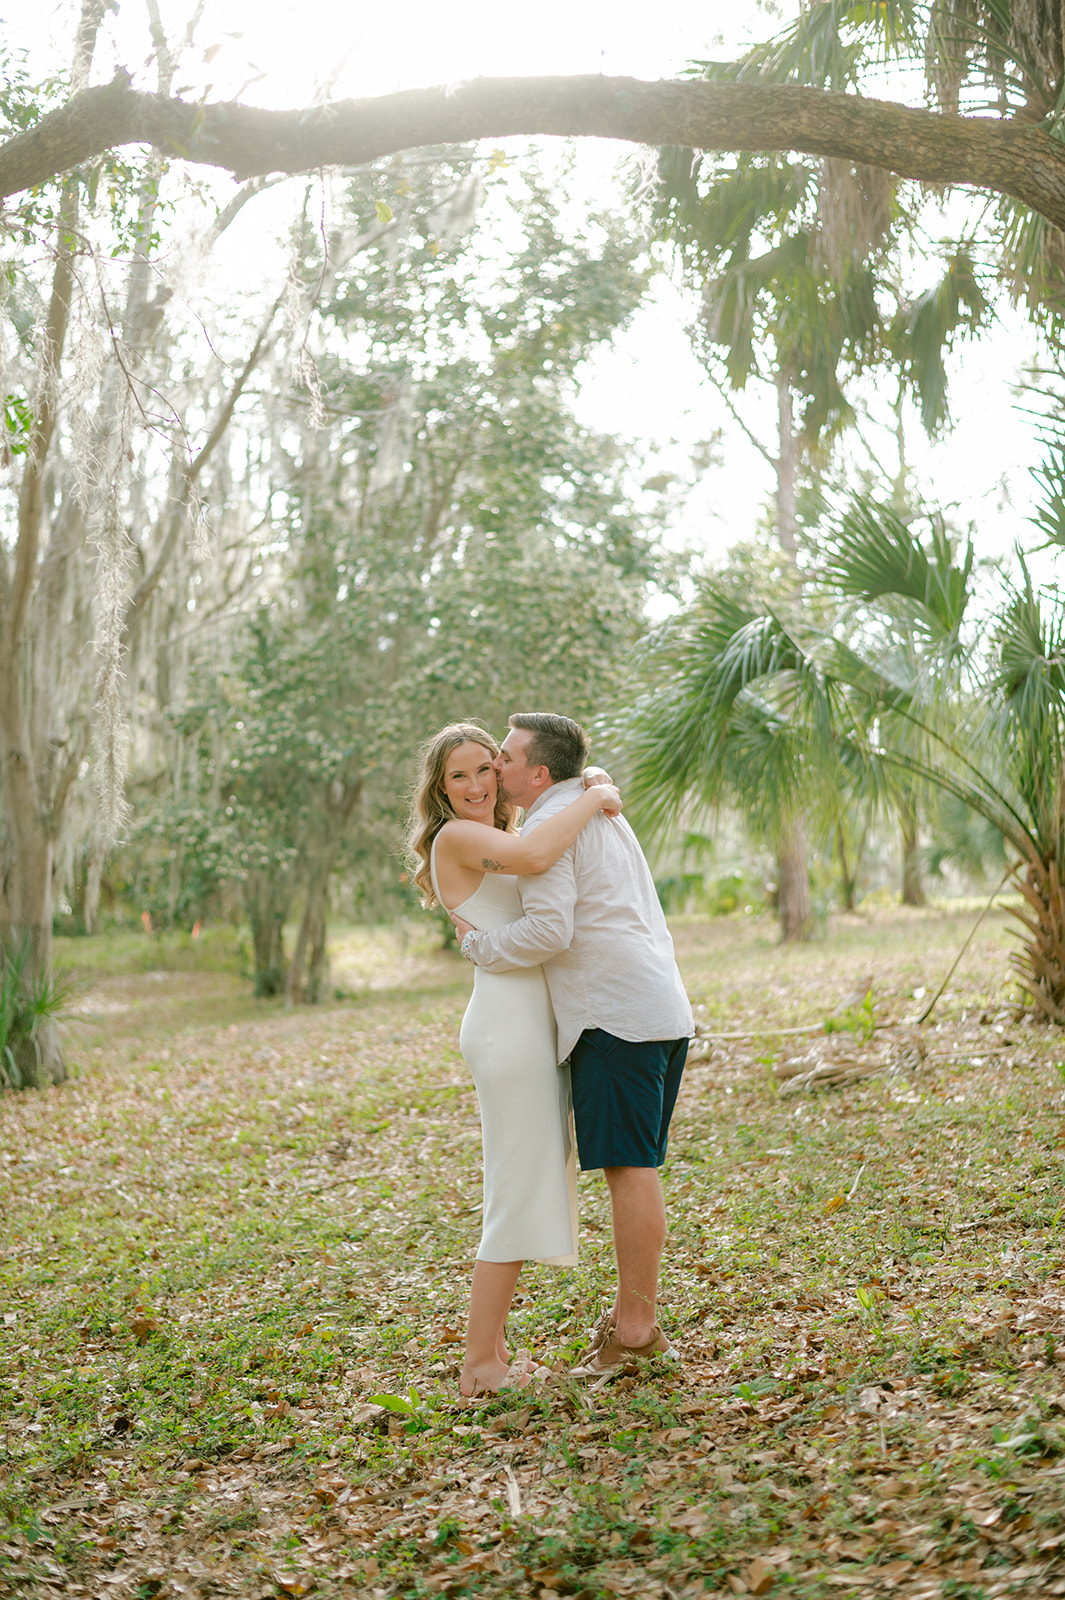 "Engagement session featuring beautiful Tampa scenery"
